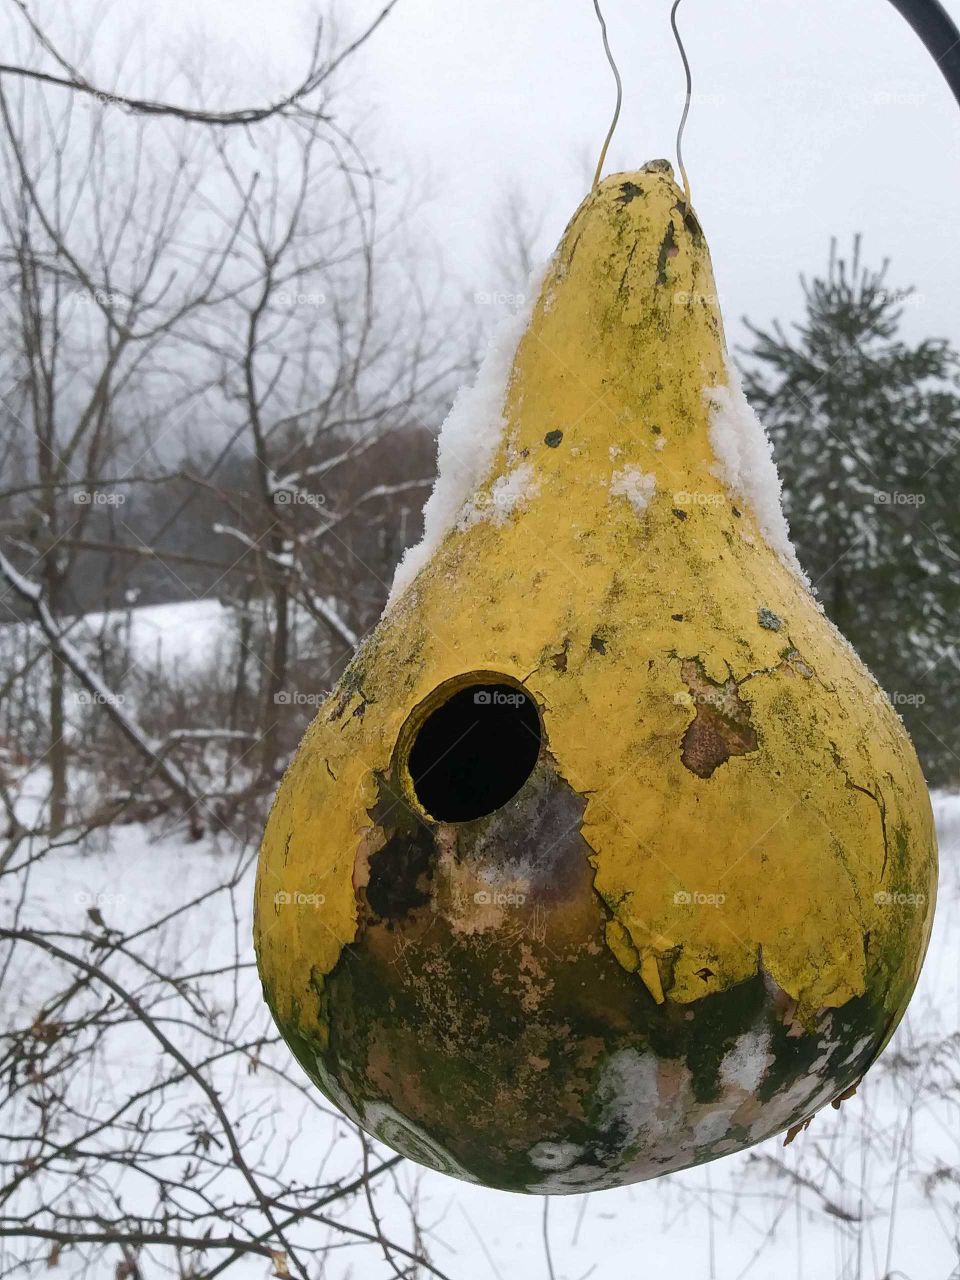 gourd with winter snow scene